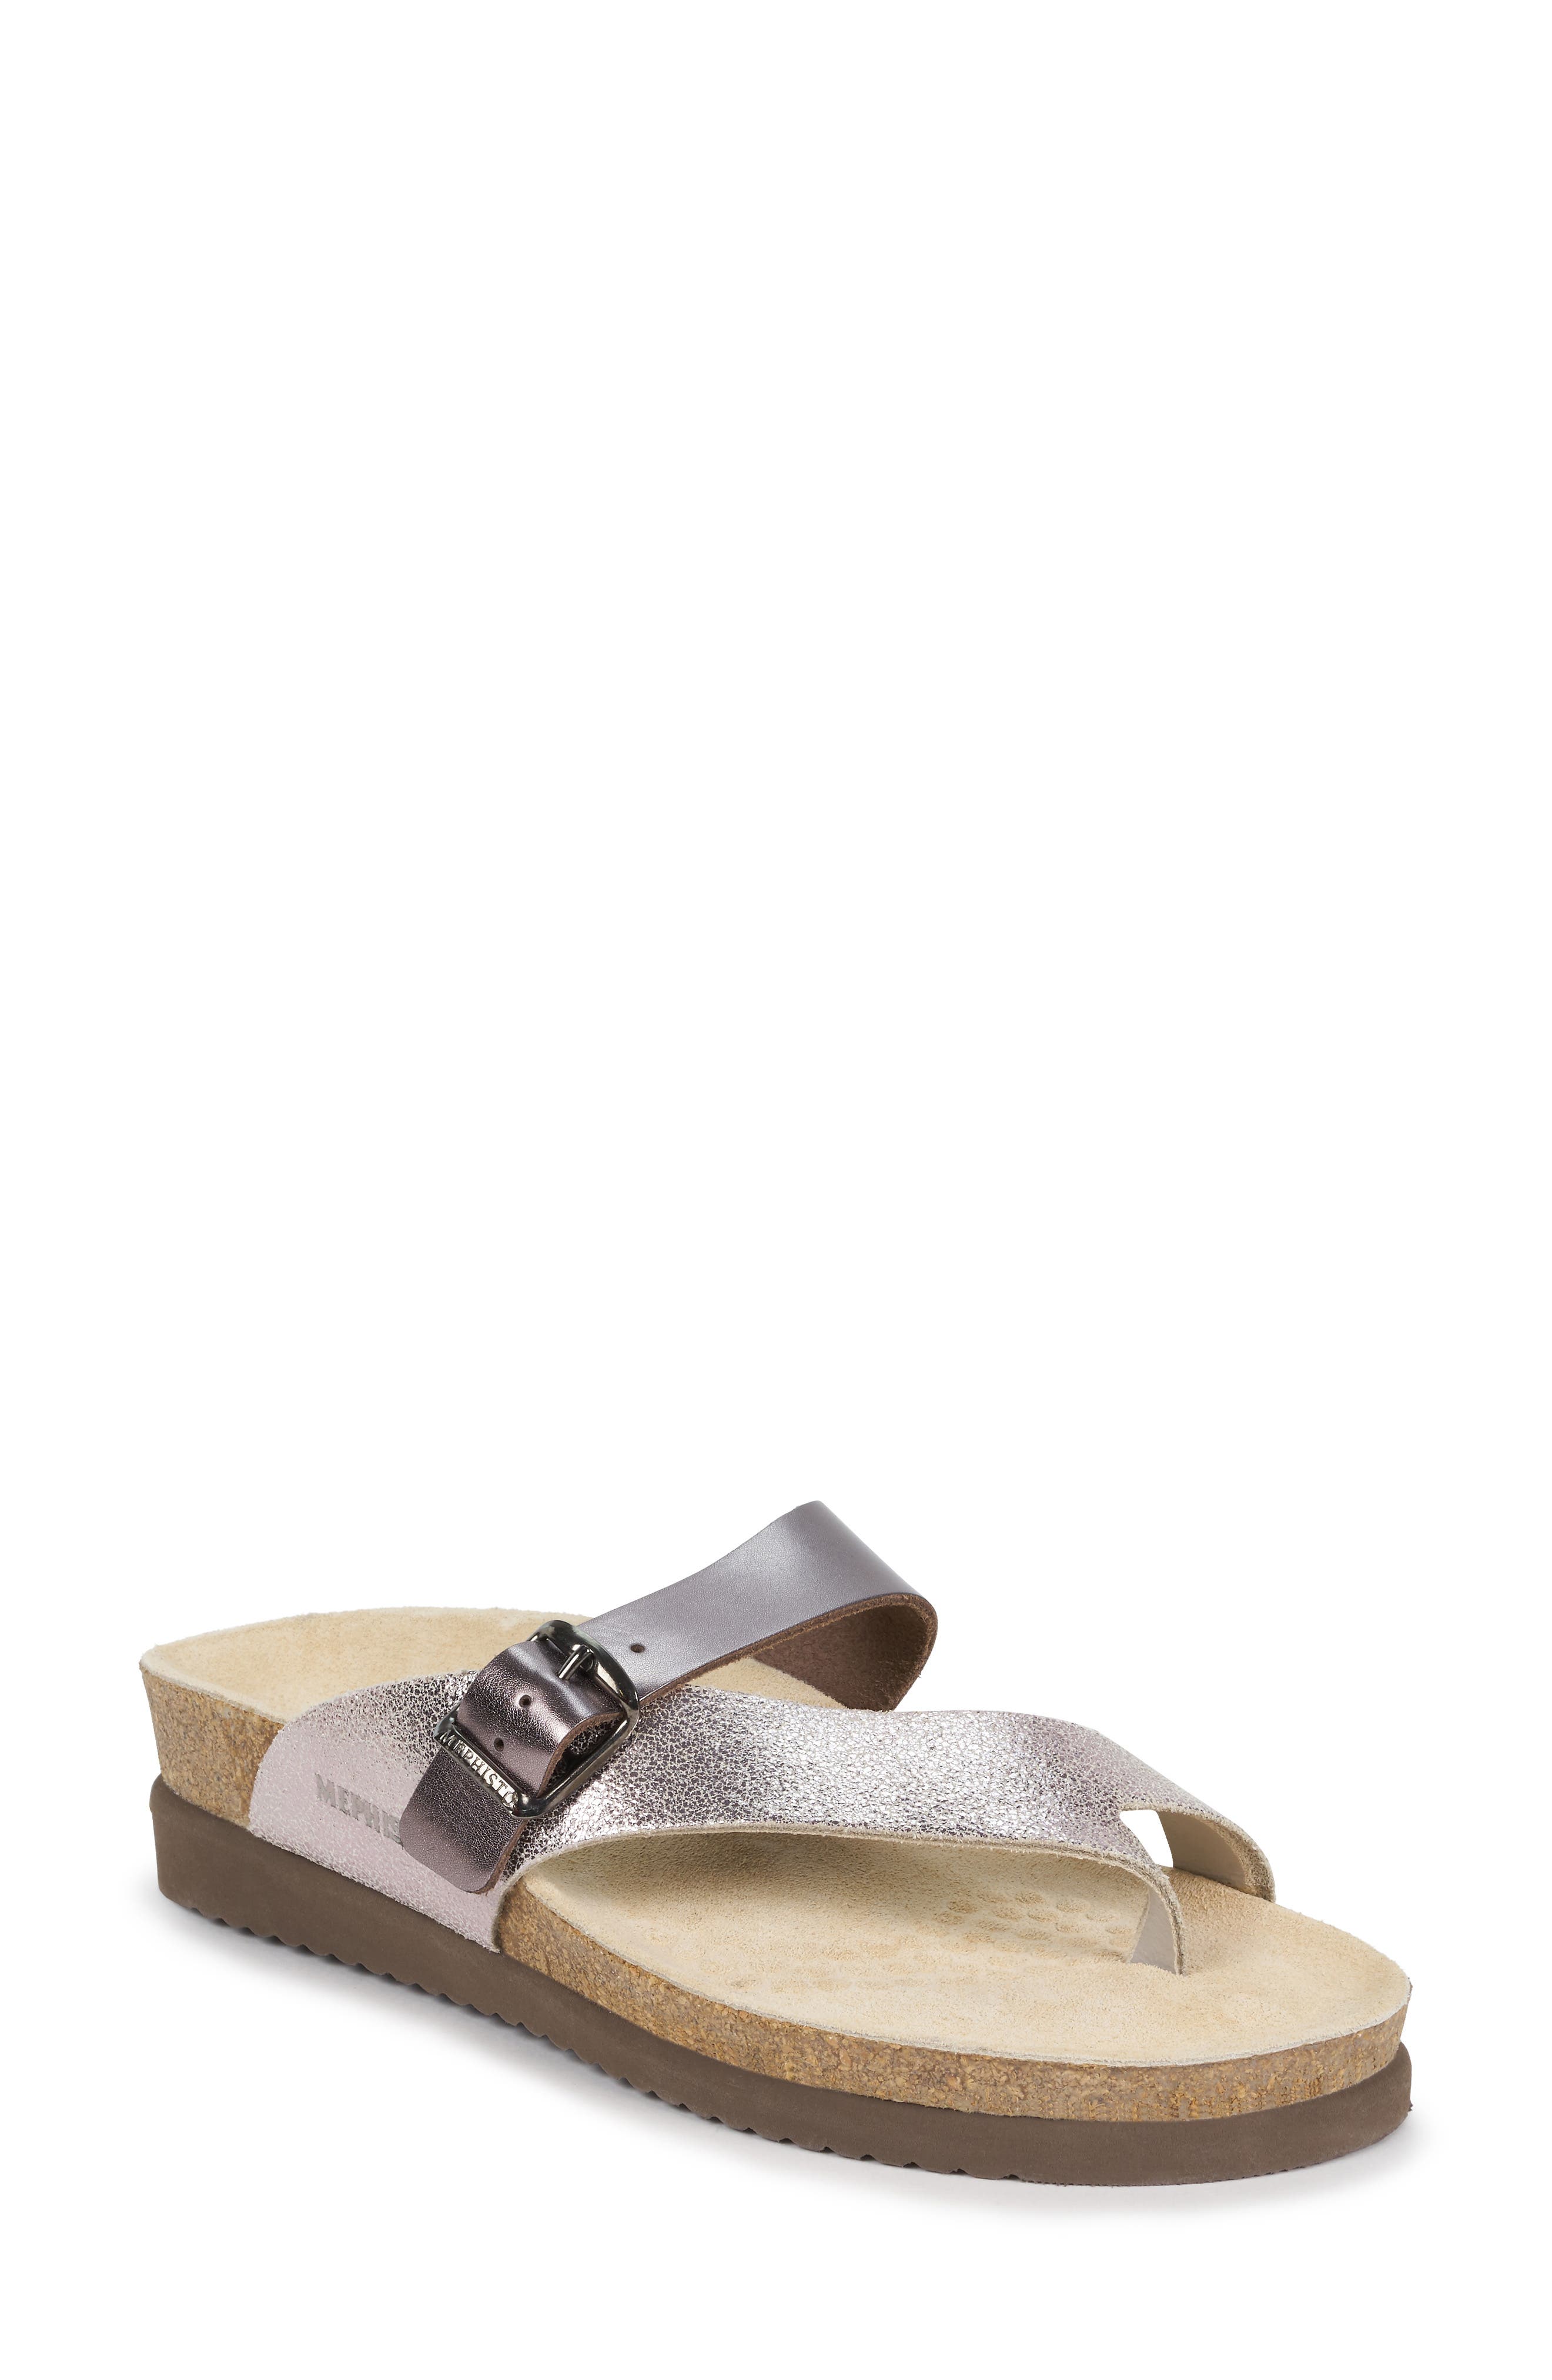 mephisto prudy sandal with arch support